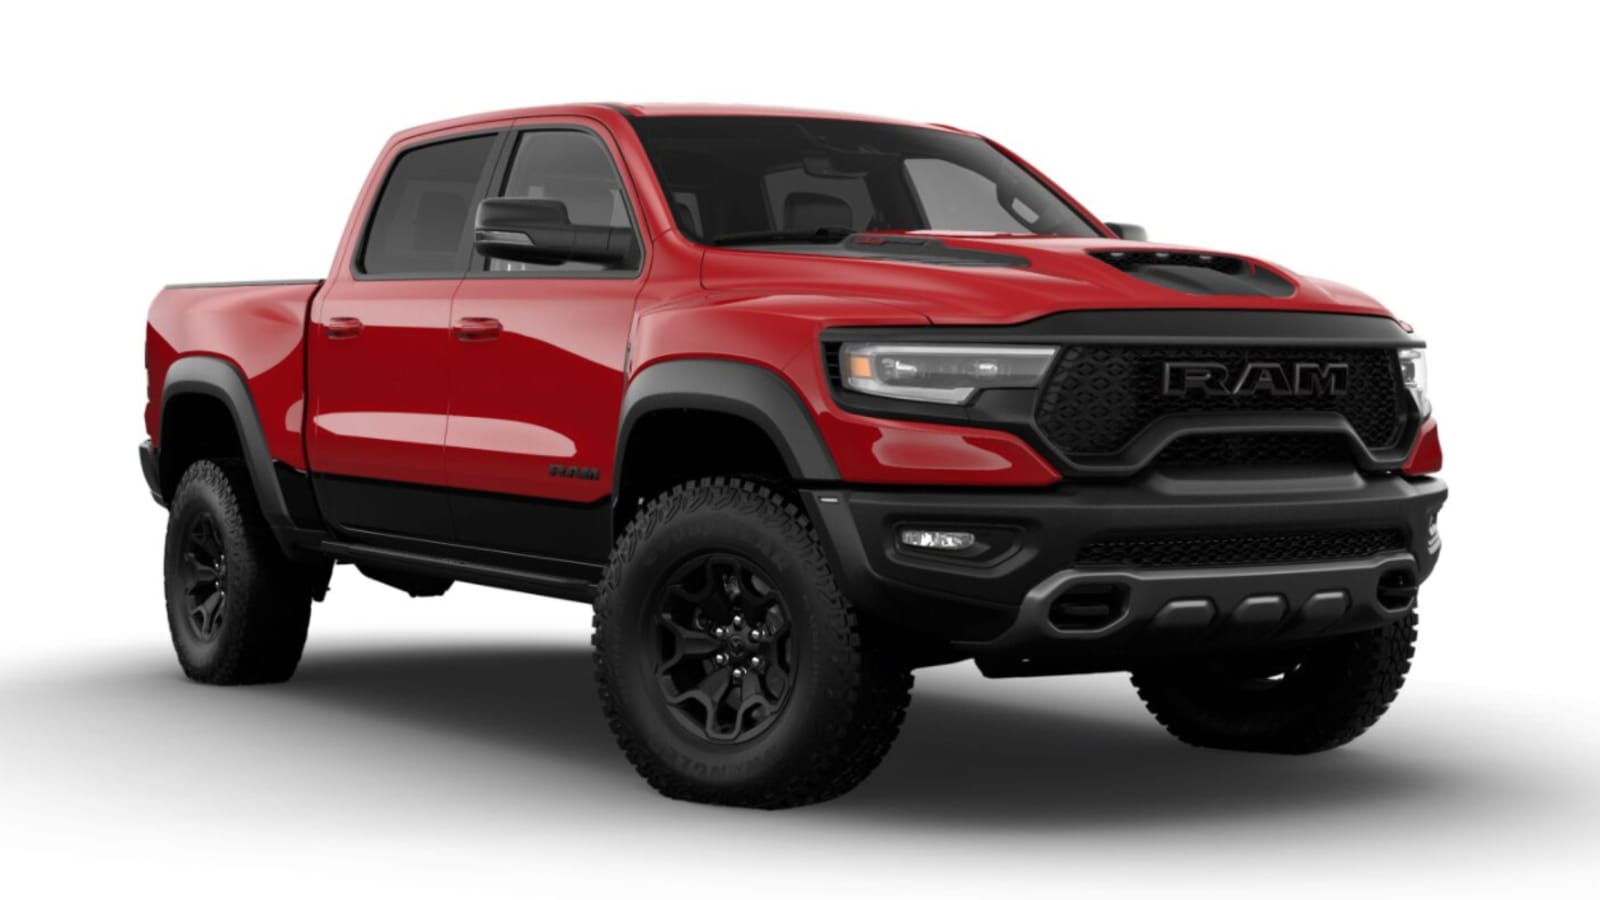 2021 Ram 1500 TRX configurator is up | Here's how we'd build ours